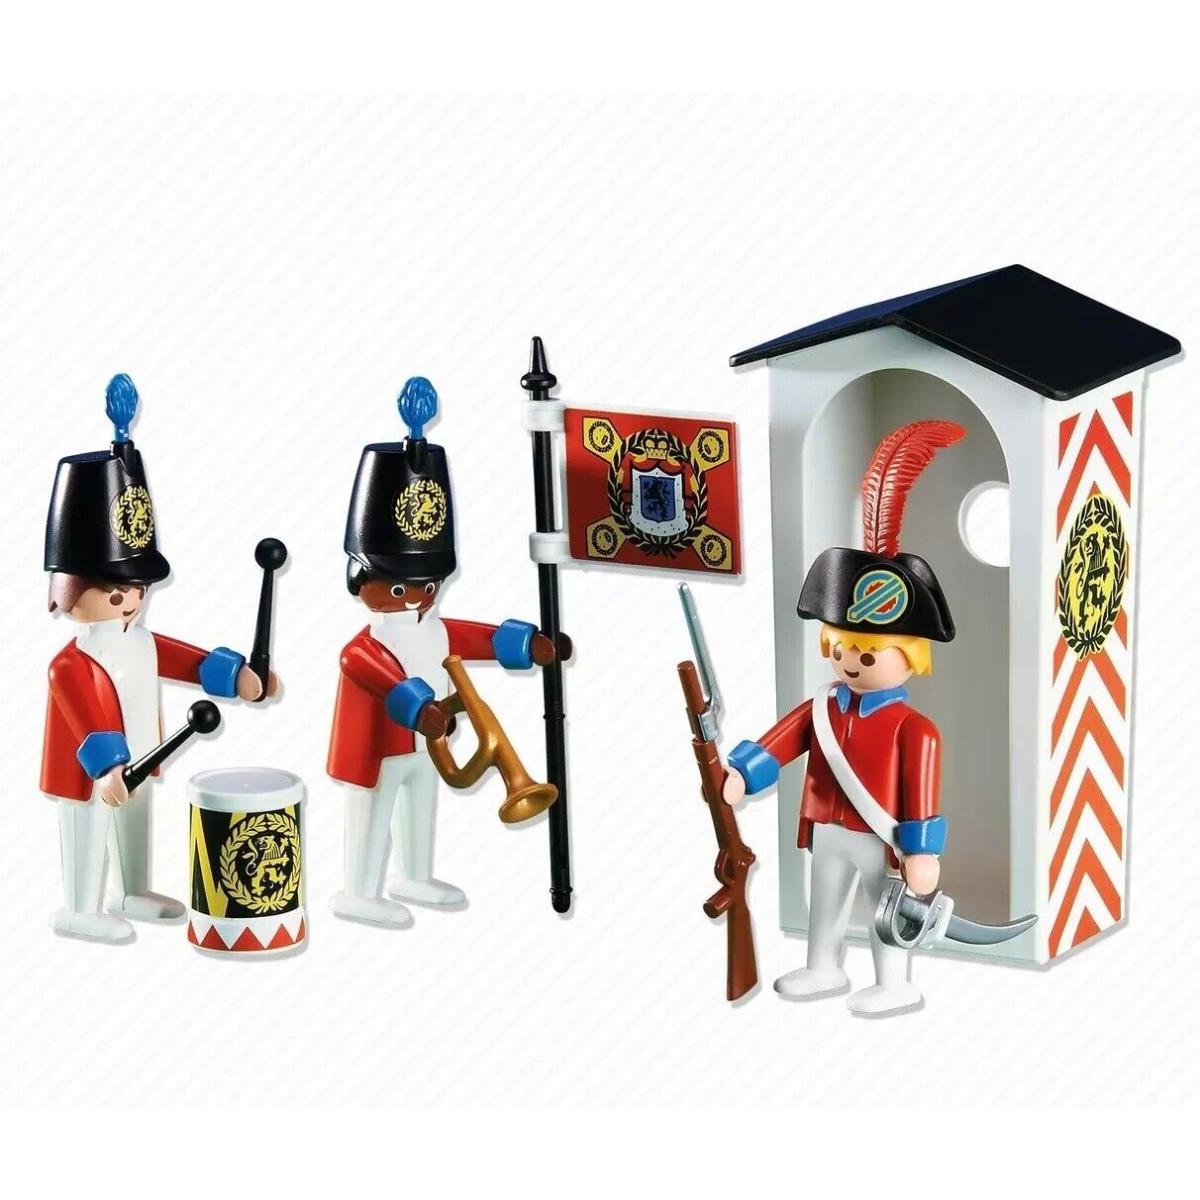 Playmobil 6413 Sentry Box British Redcoat Guards Soliders Drum Beefeater